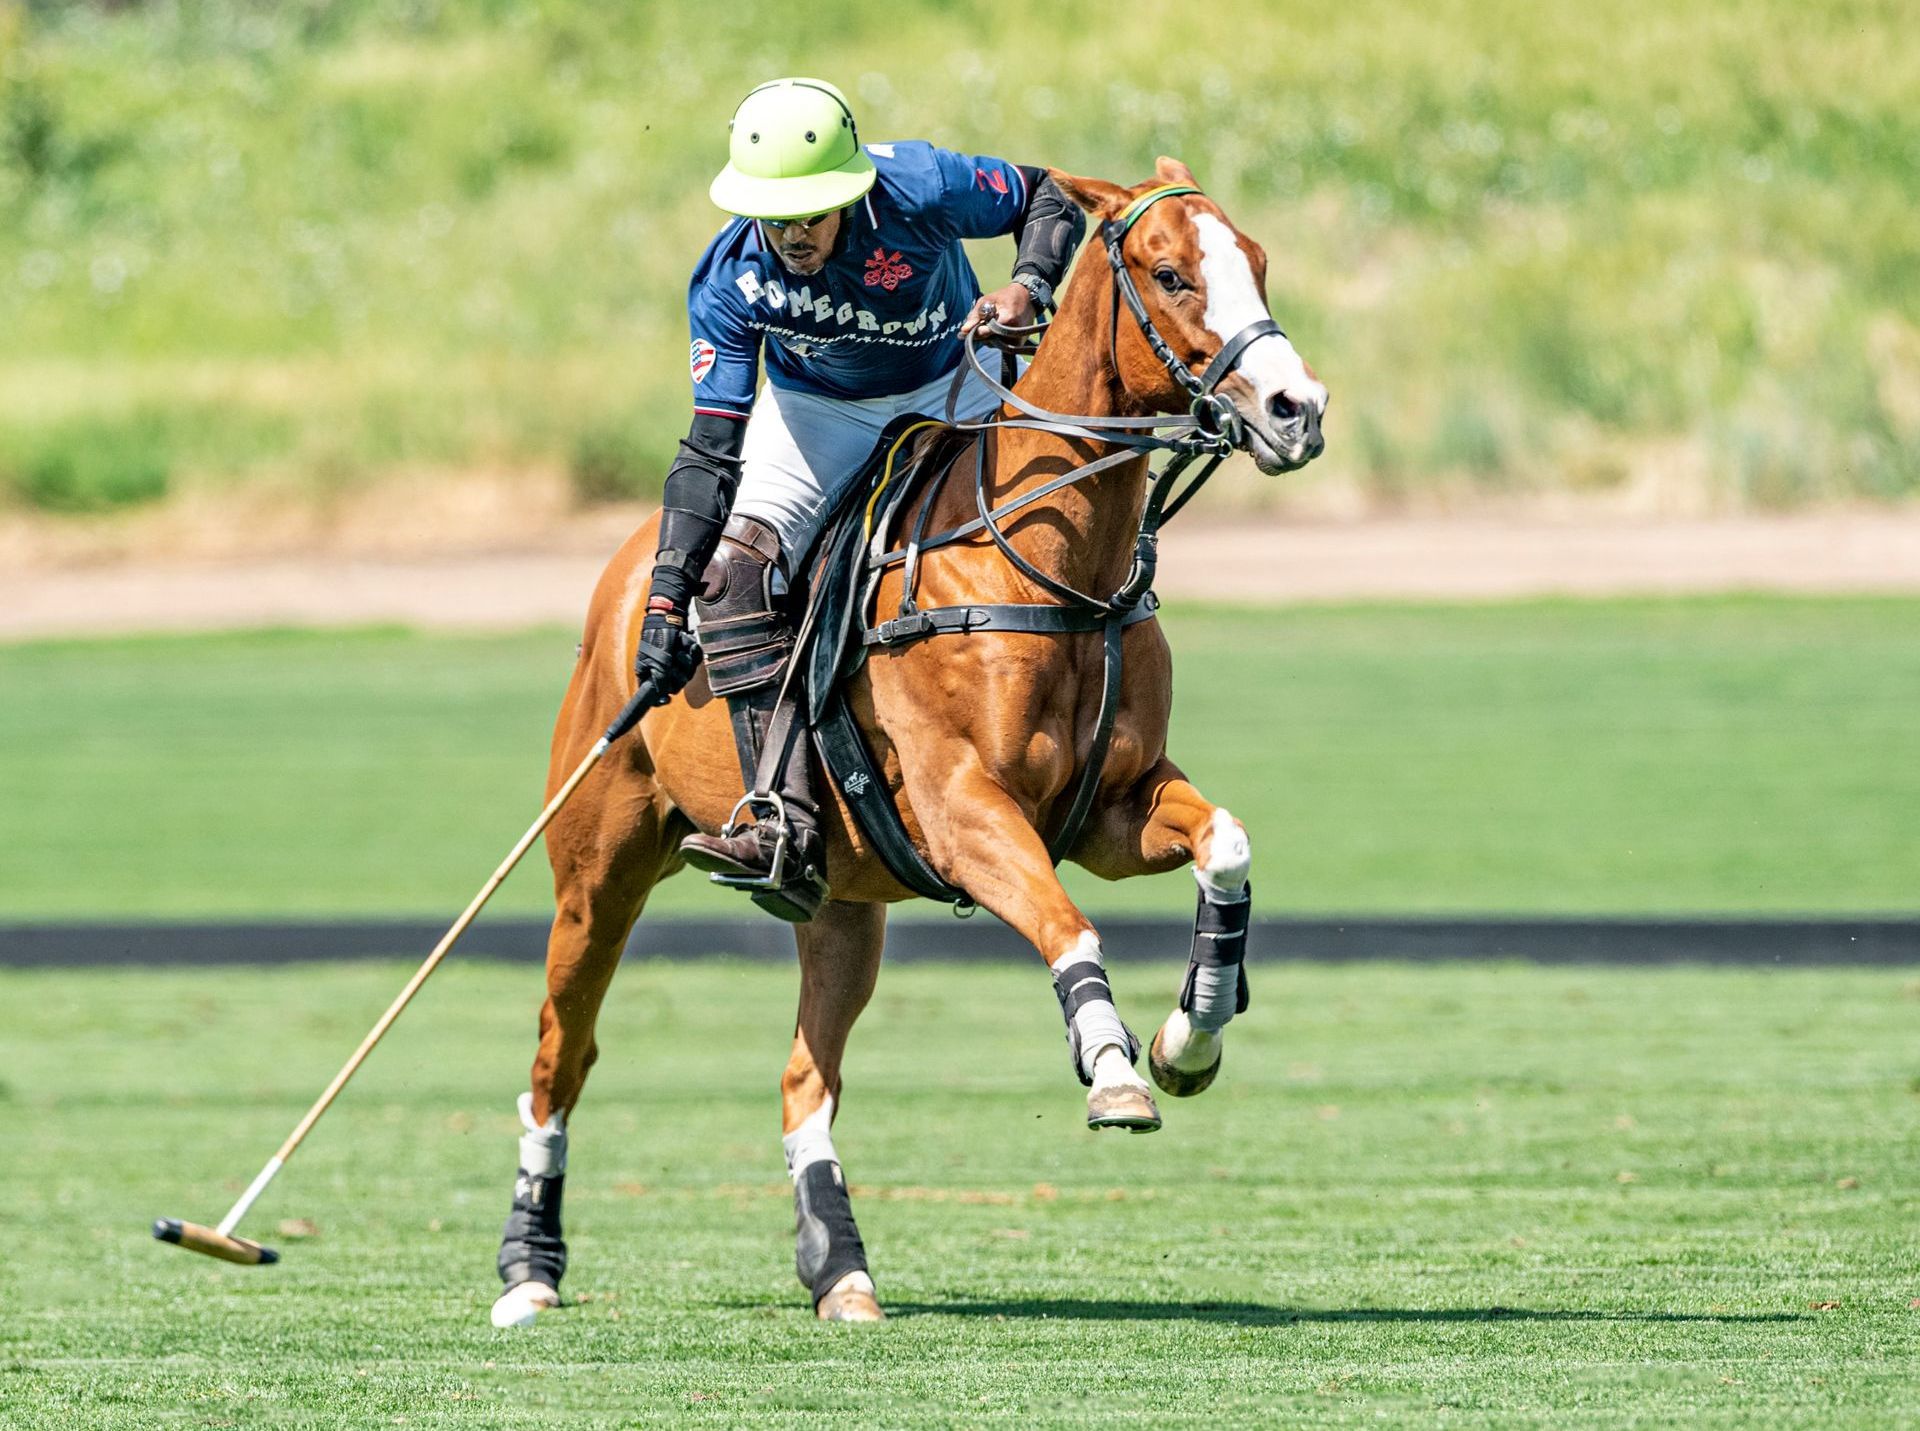 A man is riding a horse while playing polo on a field.